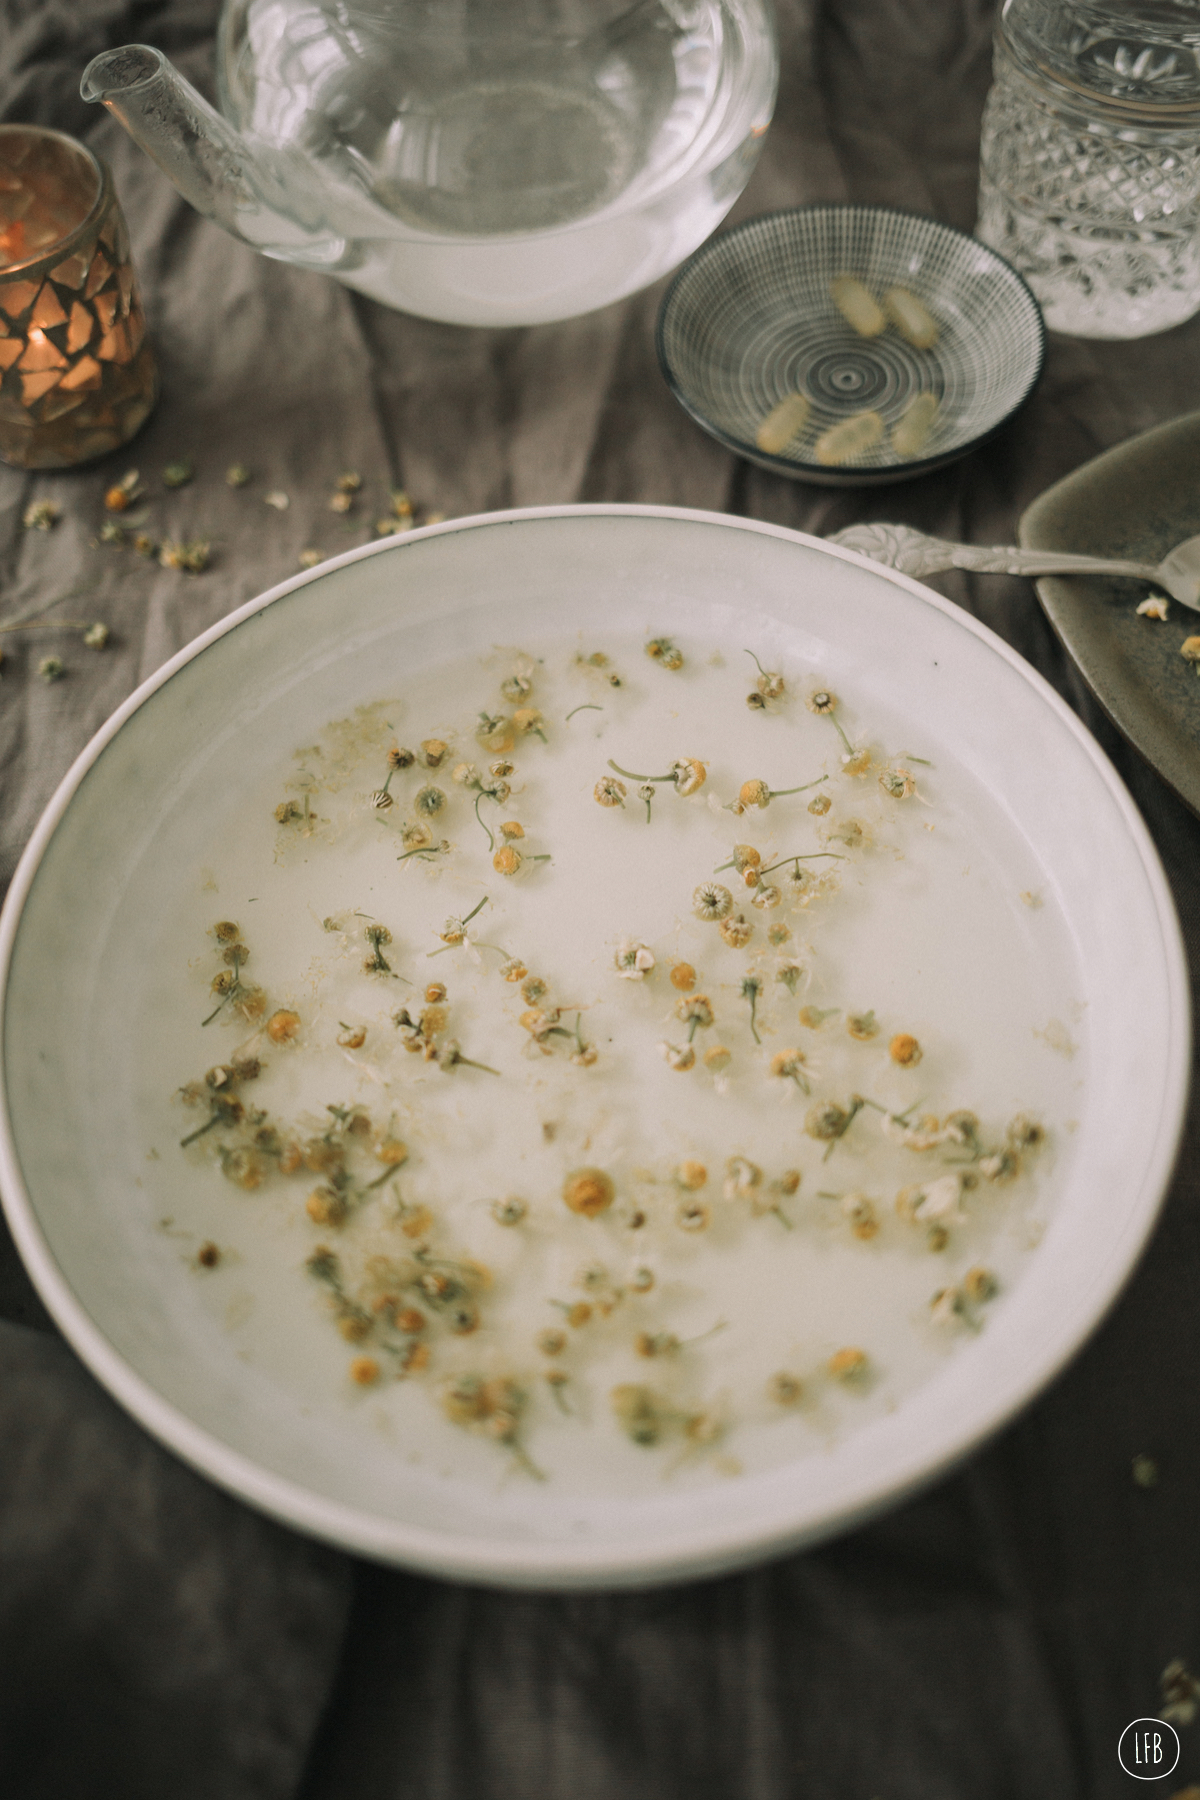 Camomile Steam bath for colds and flus - photography: Rae Tashman - lovefromberlin.net